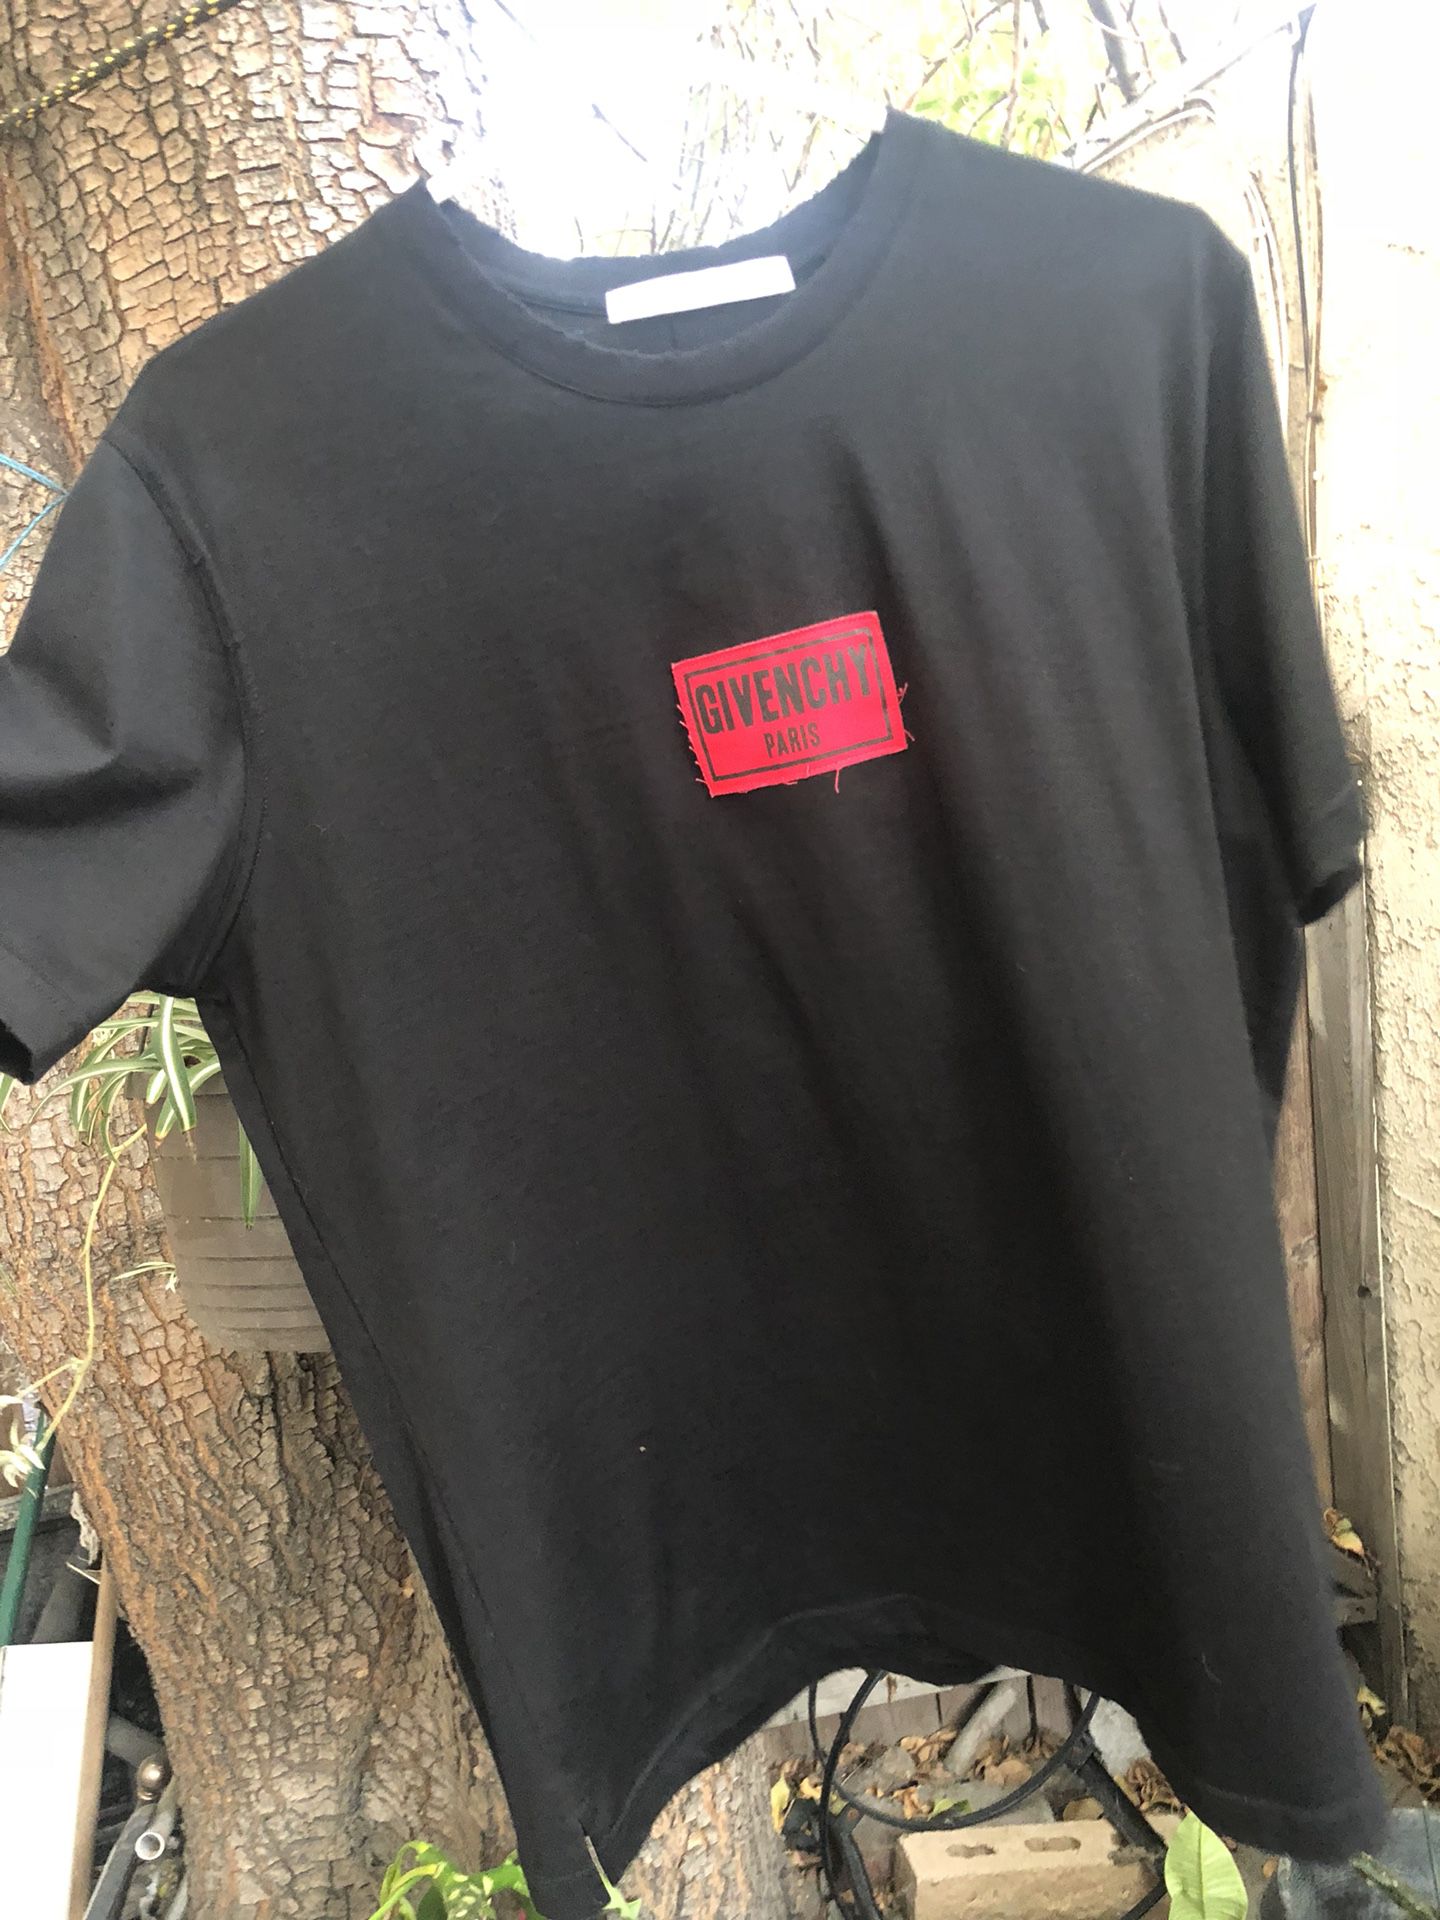 Givenchy Paris box T-shirt for in Chino Hills, CA - OfferUp